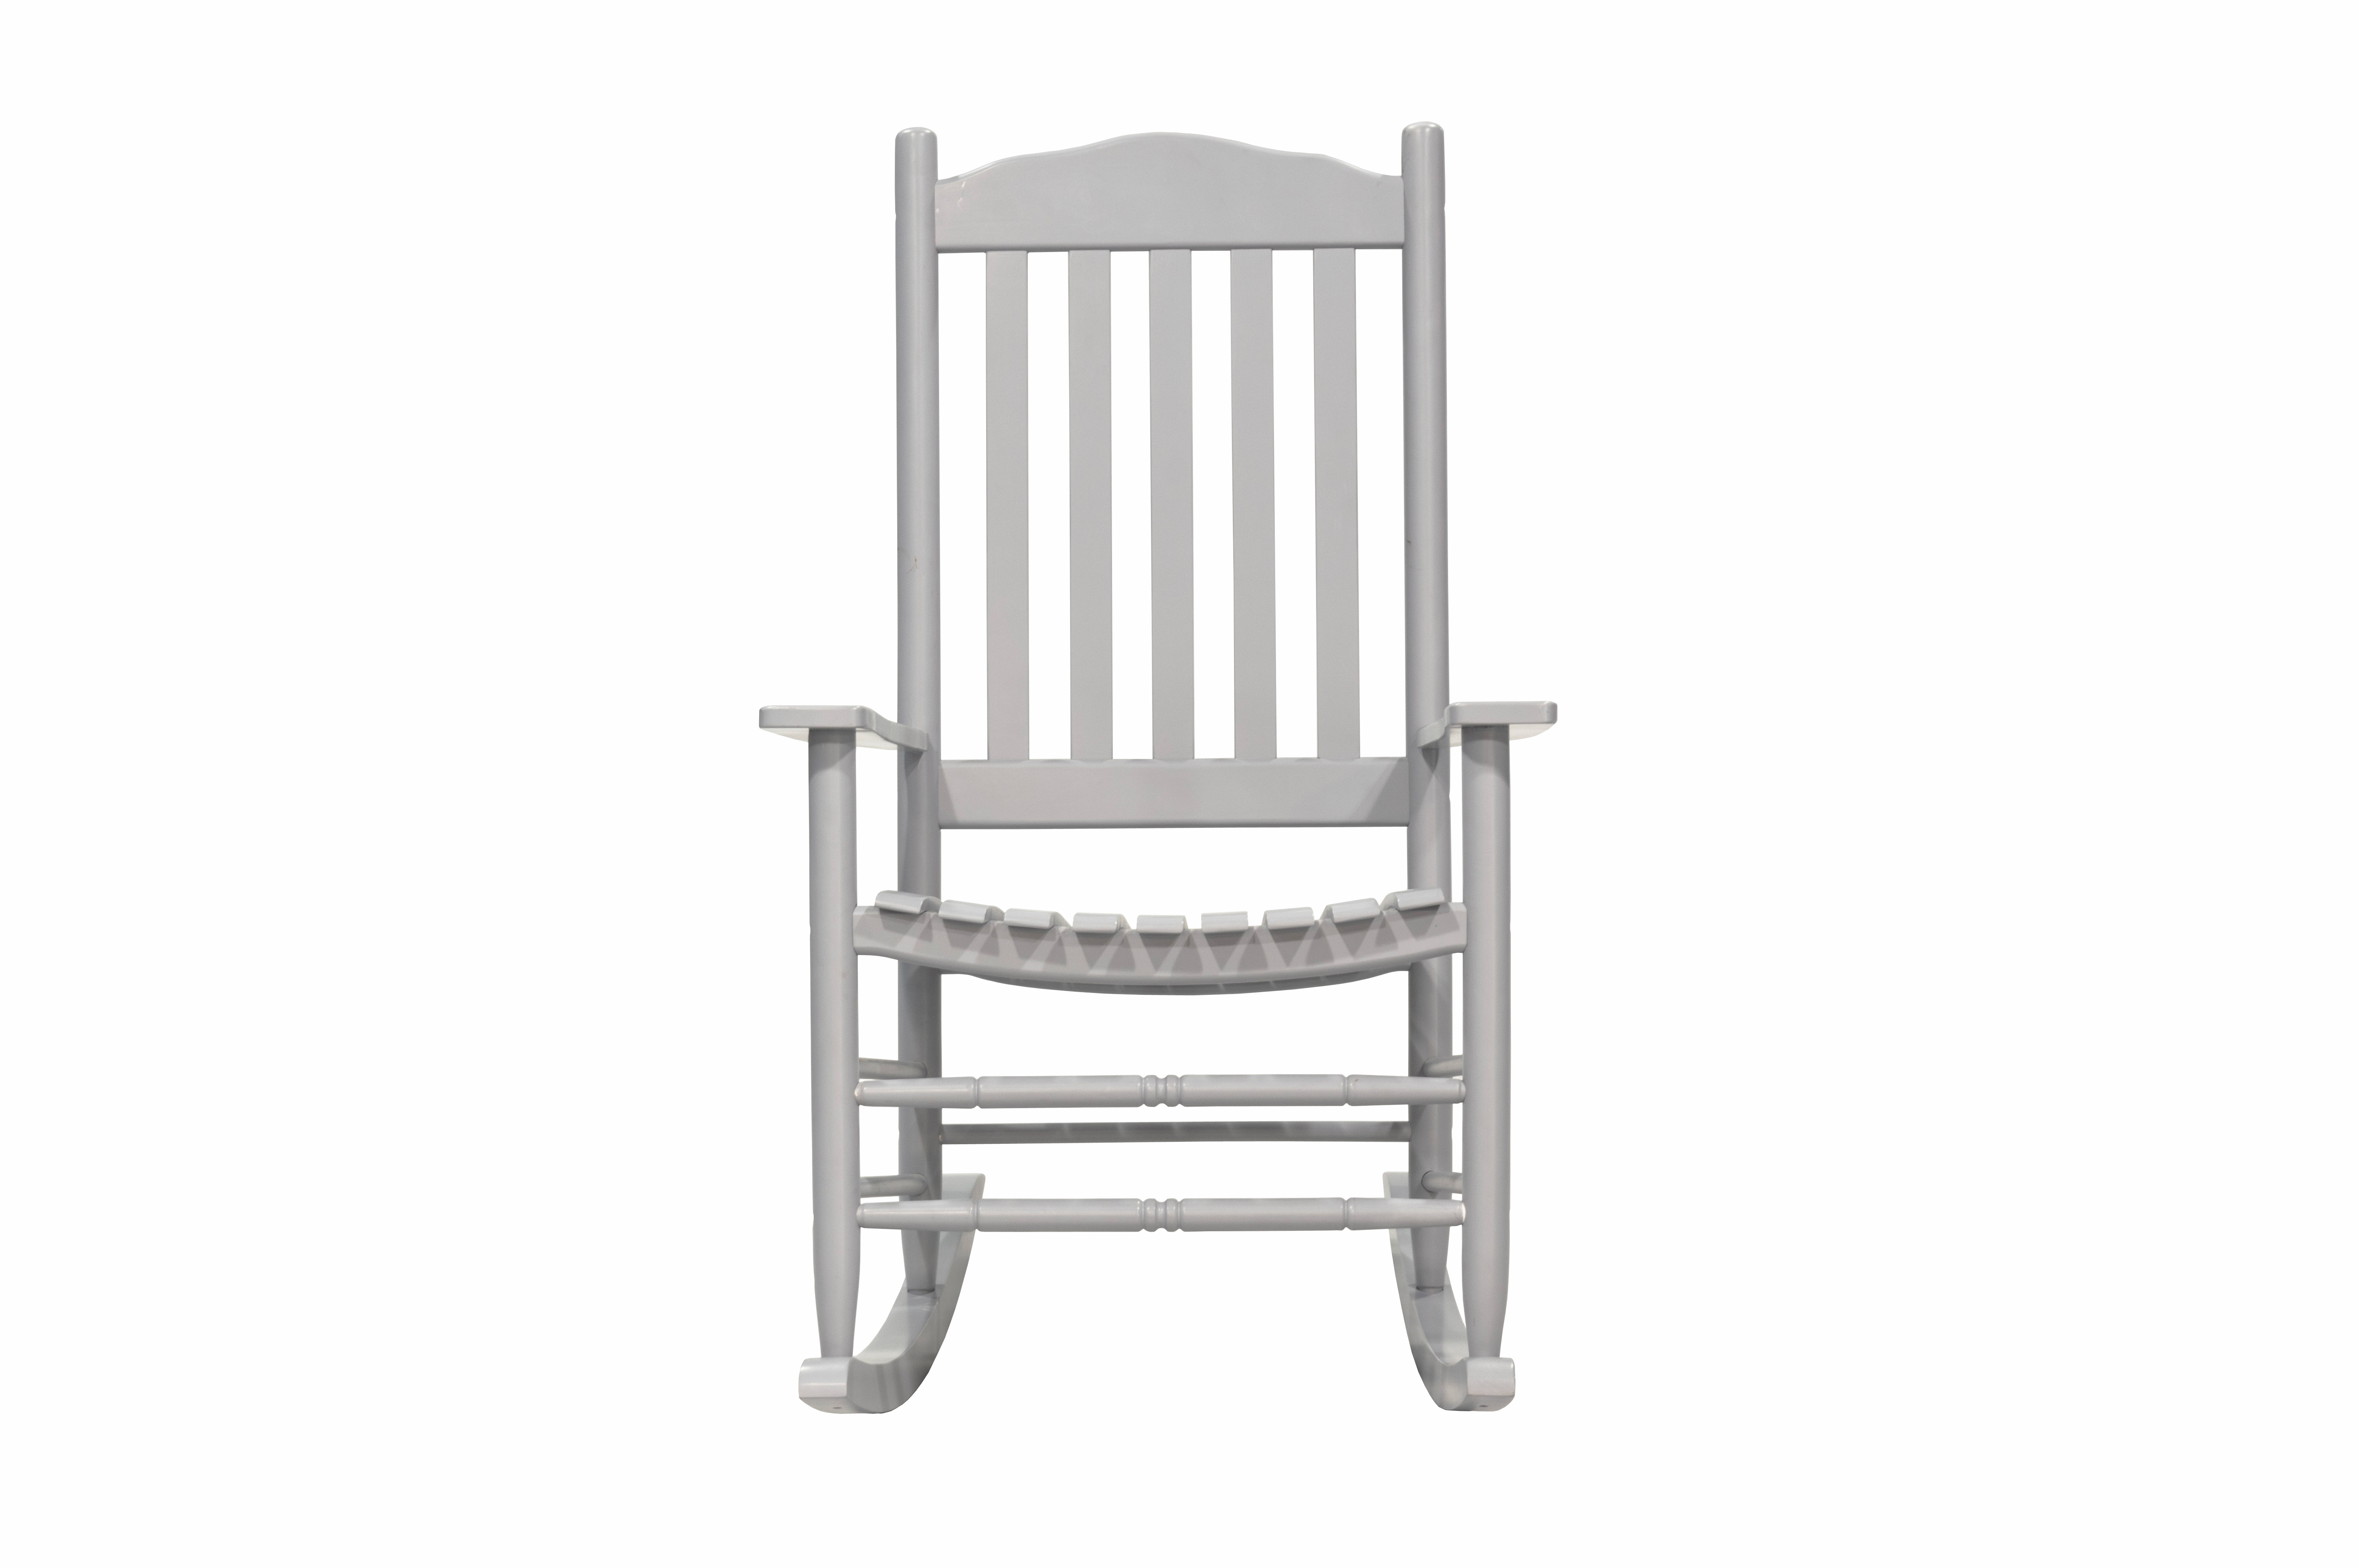 Outdoor Patio Garden Furniture 3-Piece Wood Porch Rocking Chair Set, Weather Resistant Finish, 2 Rocking Chairs and 1 Side Table - Gray - image 4 of 11